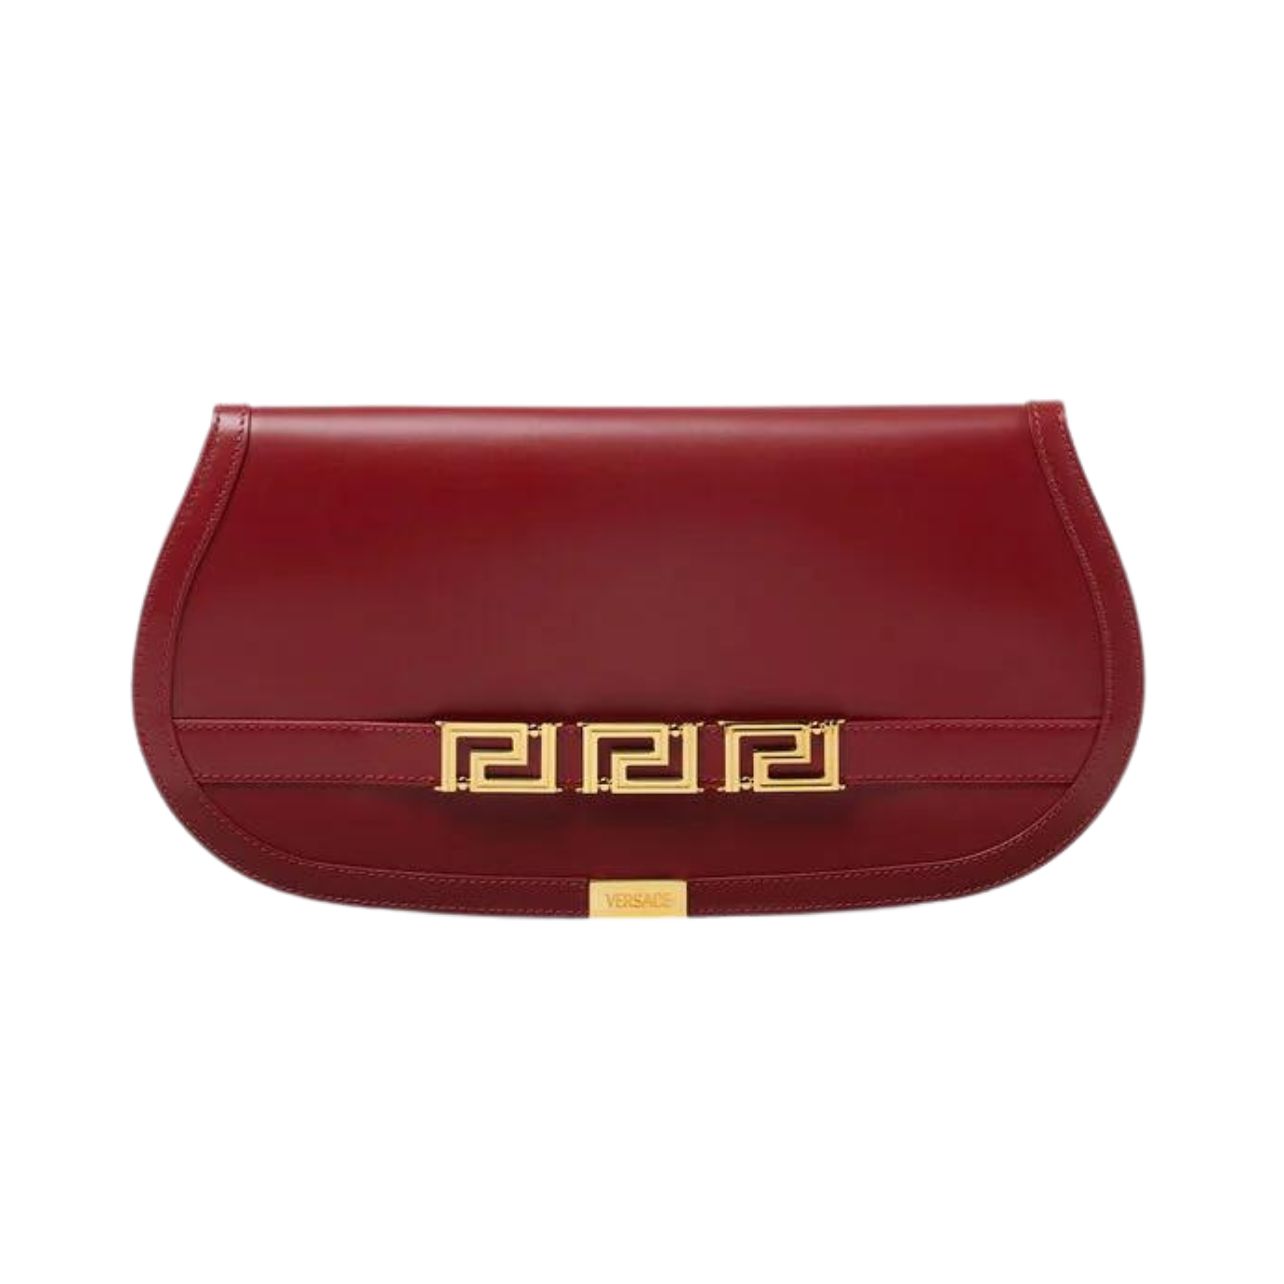 Red clutch with gold detailing